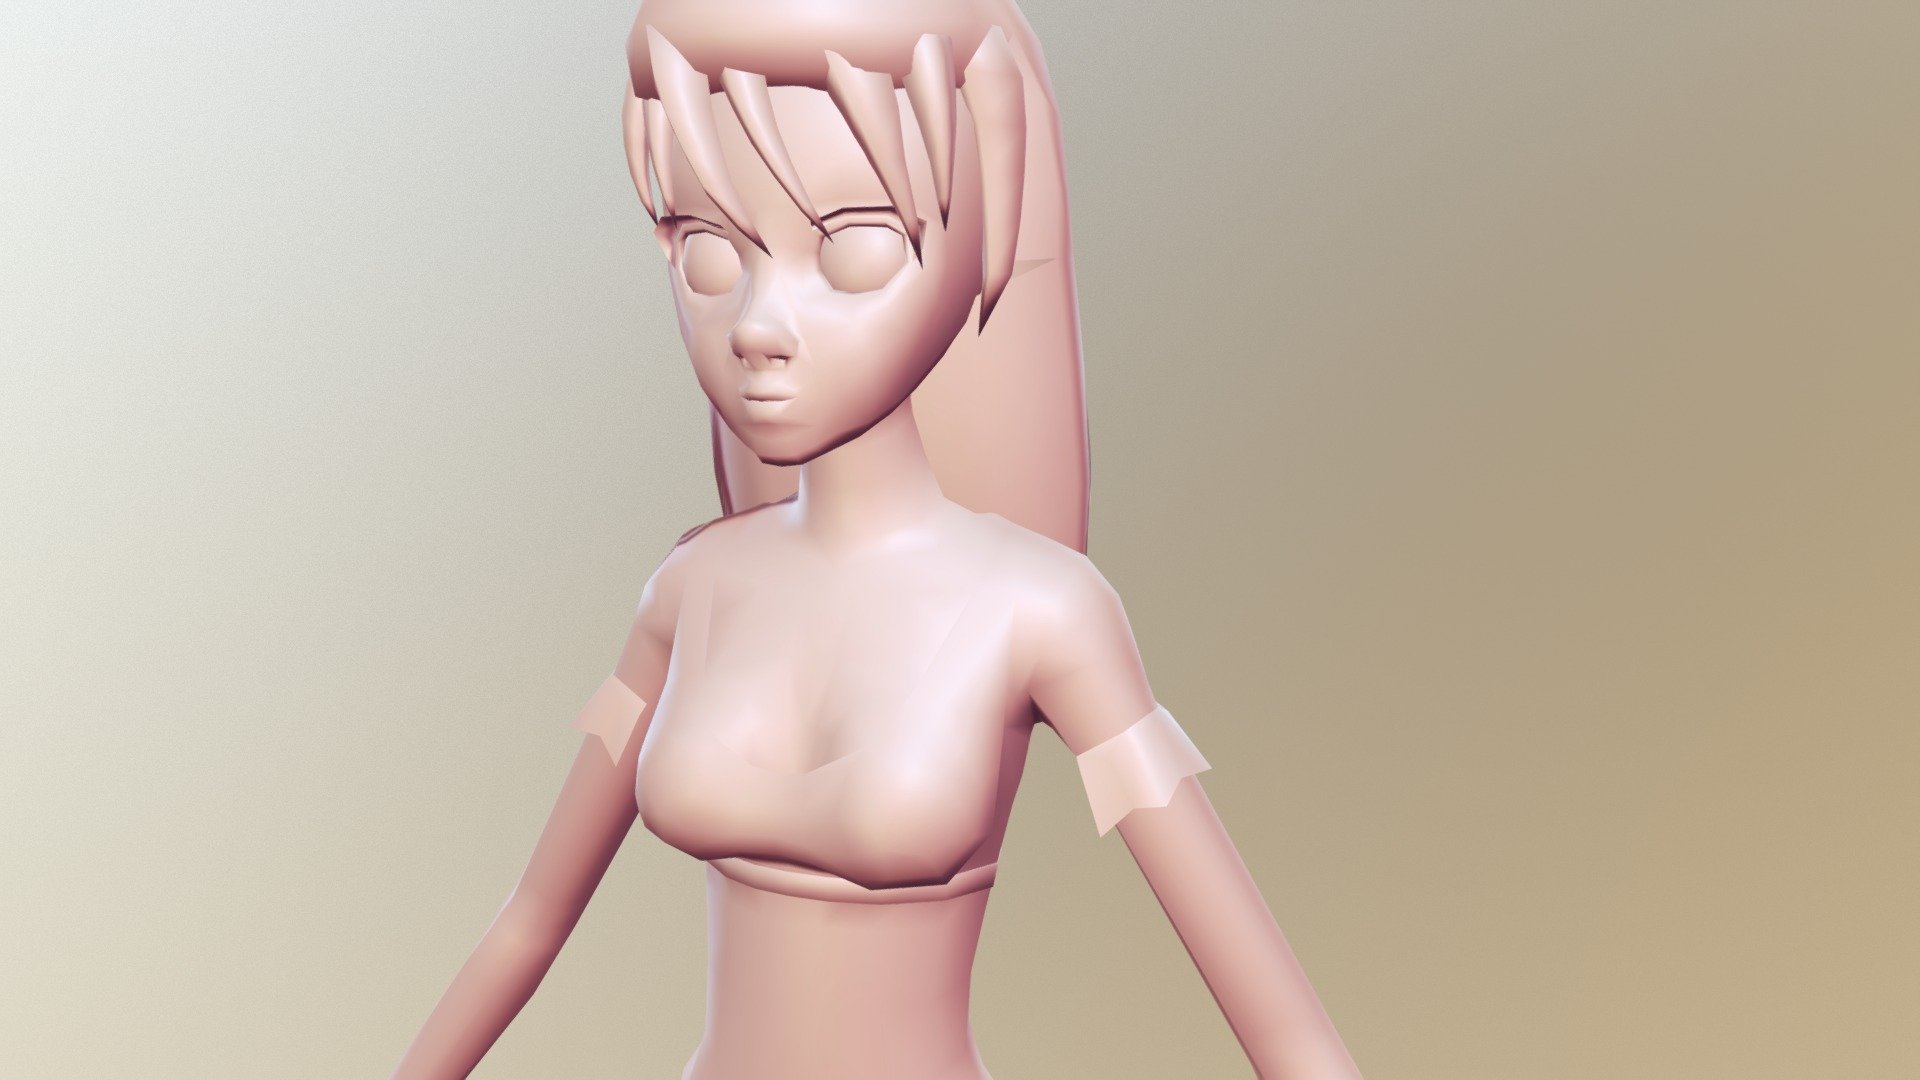 3D model game ready Low Poly Anime Character 30 VR / AR / low-poly, fnaf  anime 3d download - thirstymag.com